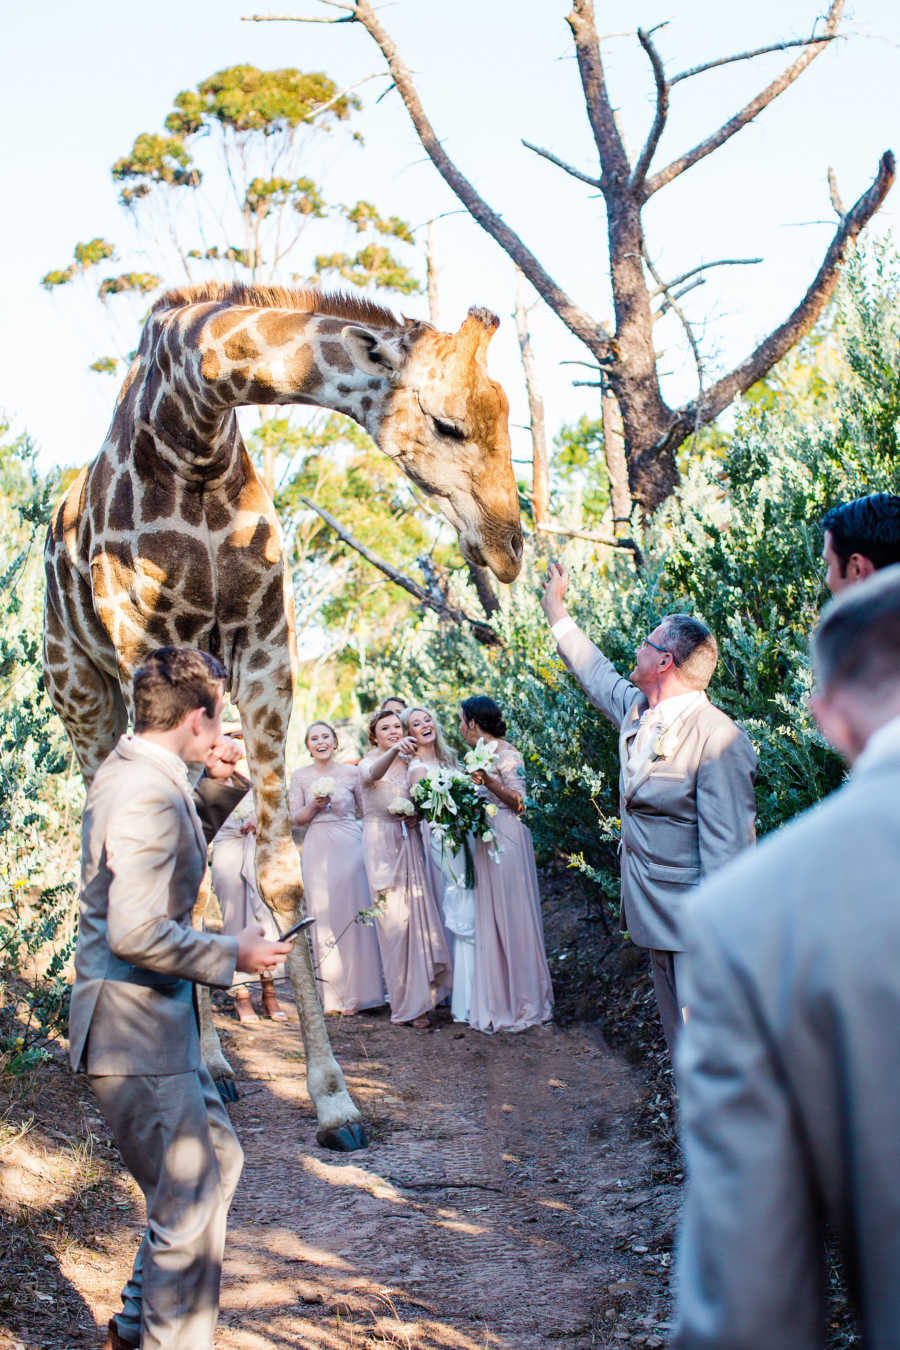 Giraffe standing in middle of wedding on South African reserve